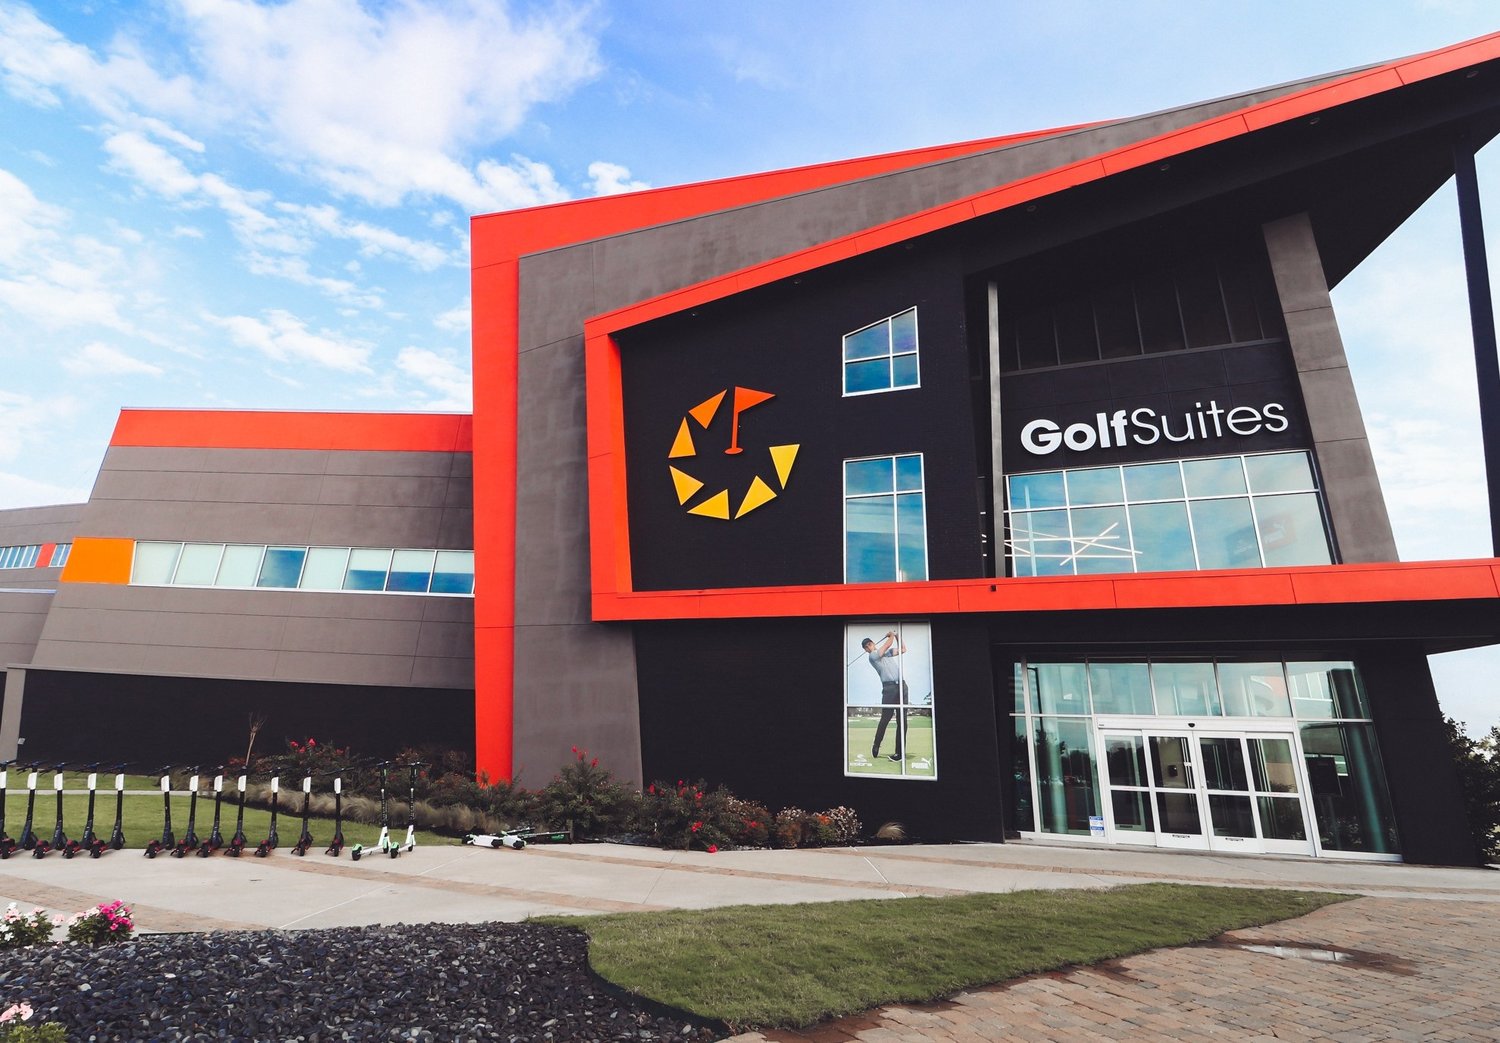 Golf Suites is planning a new facility on Parkway East to open in 2023.